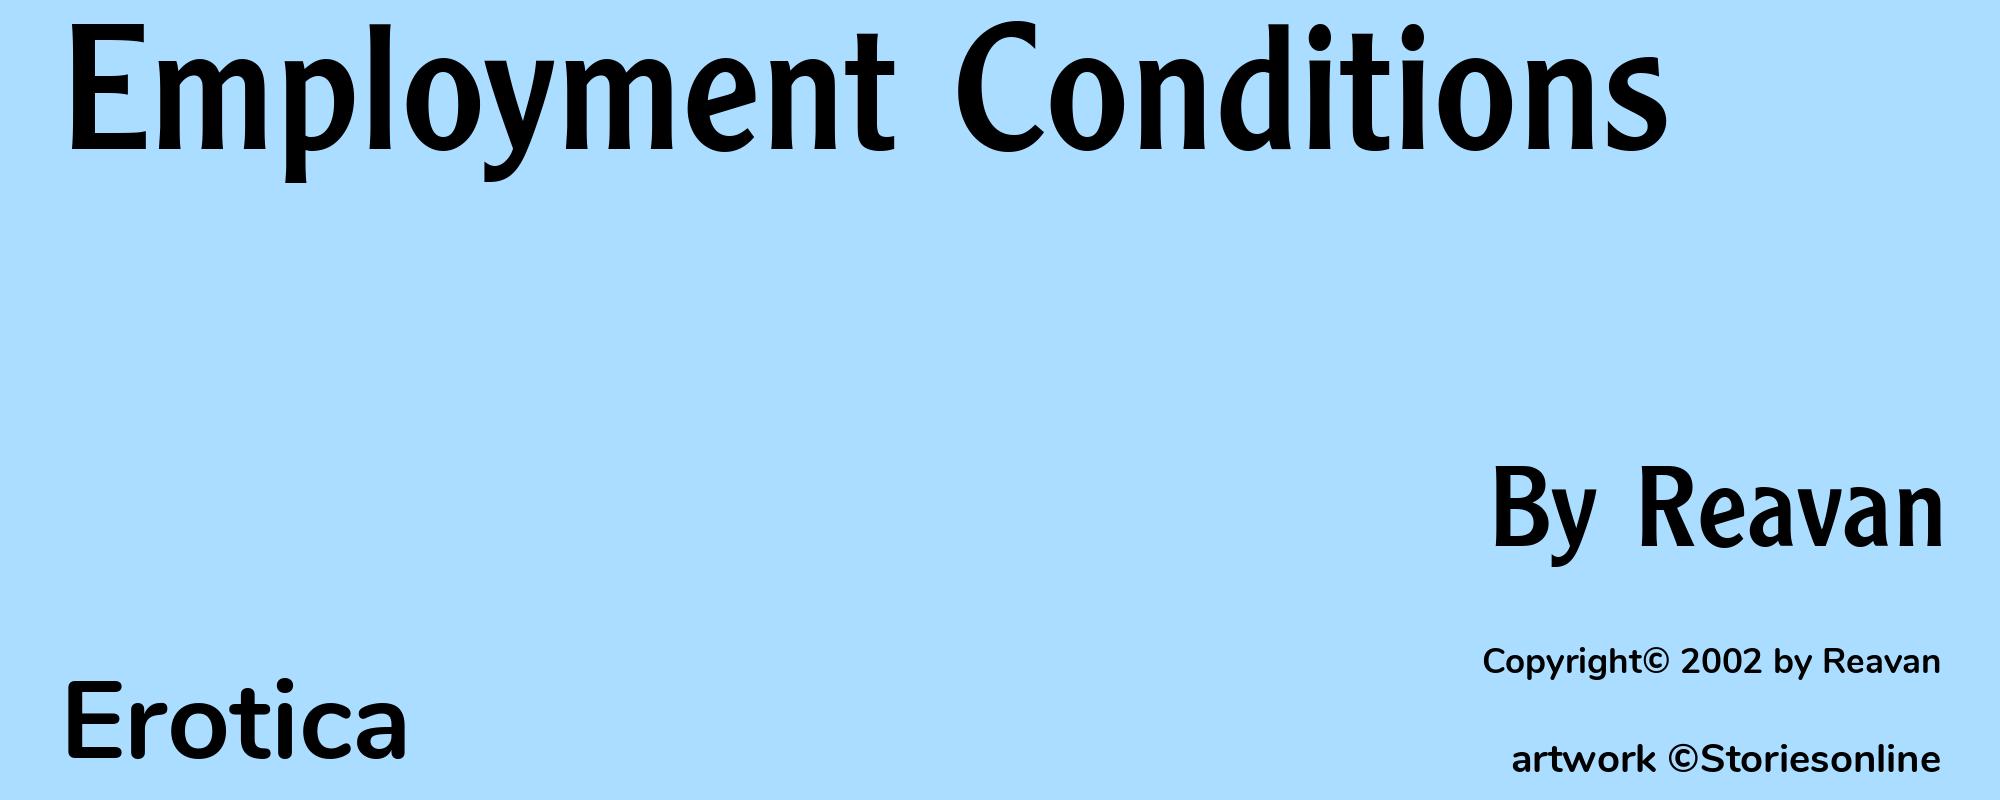 Employment Conditions - Cover